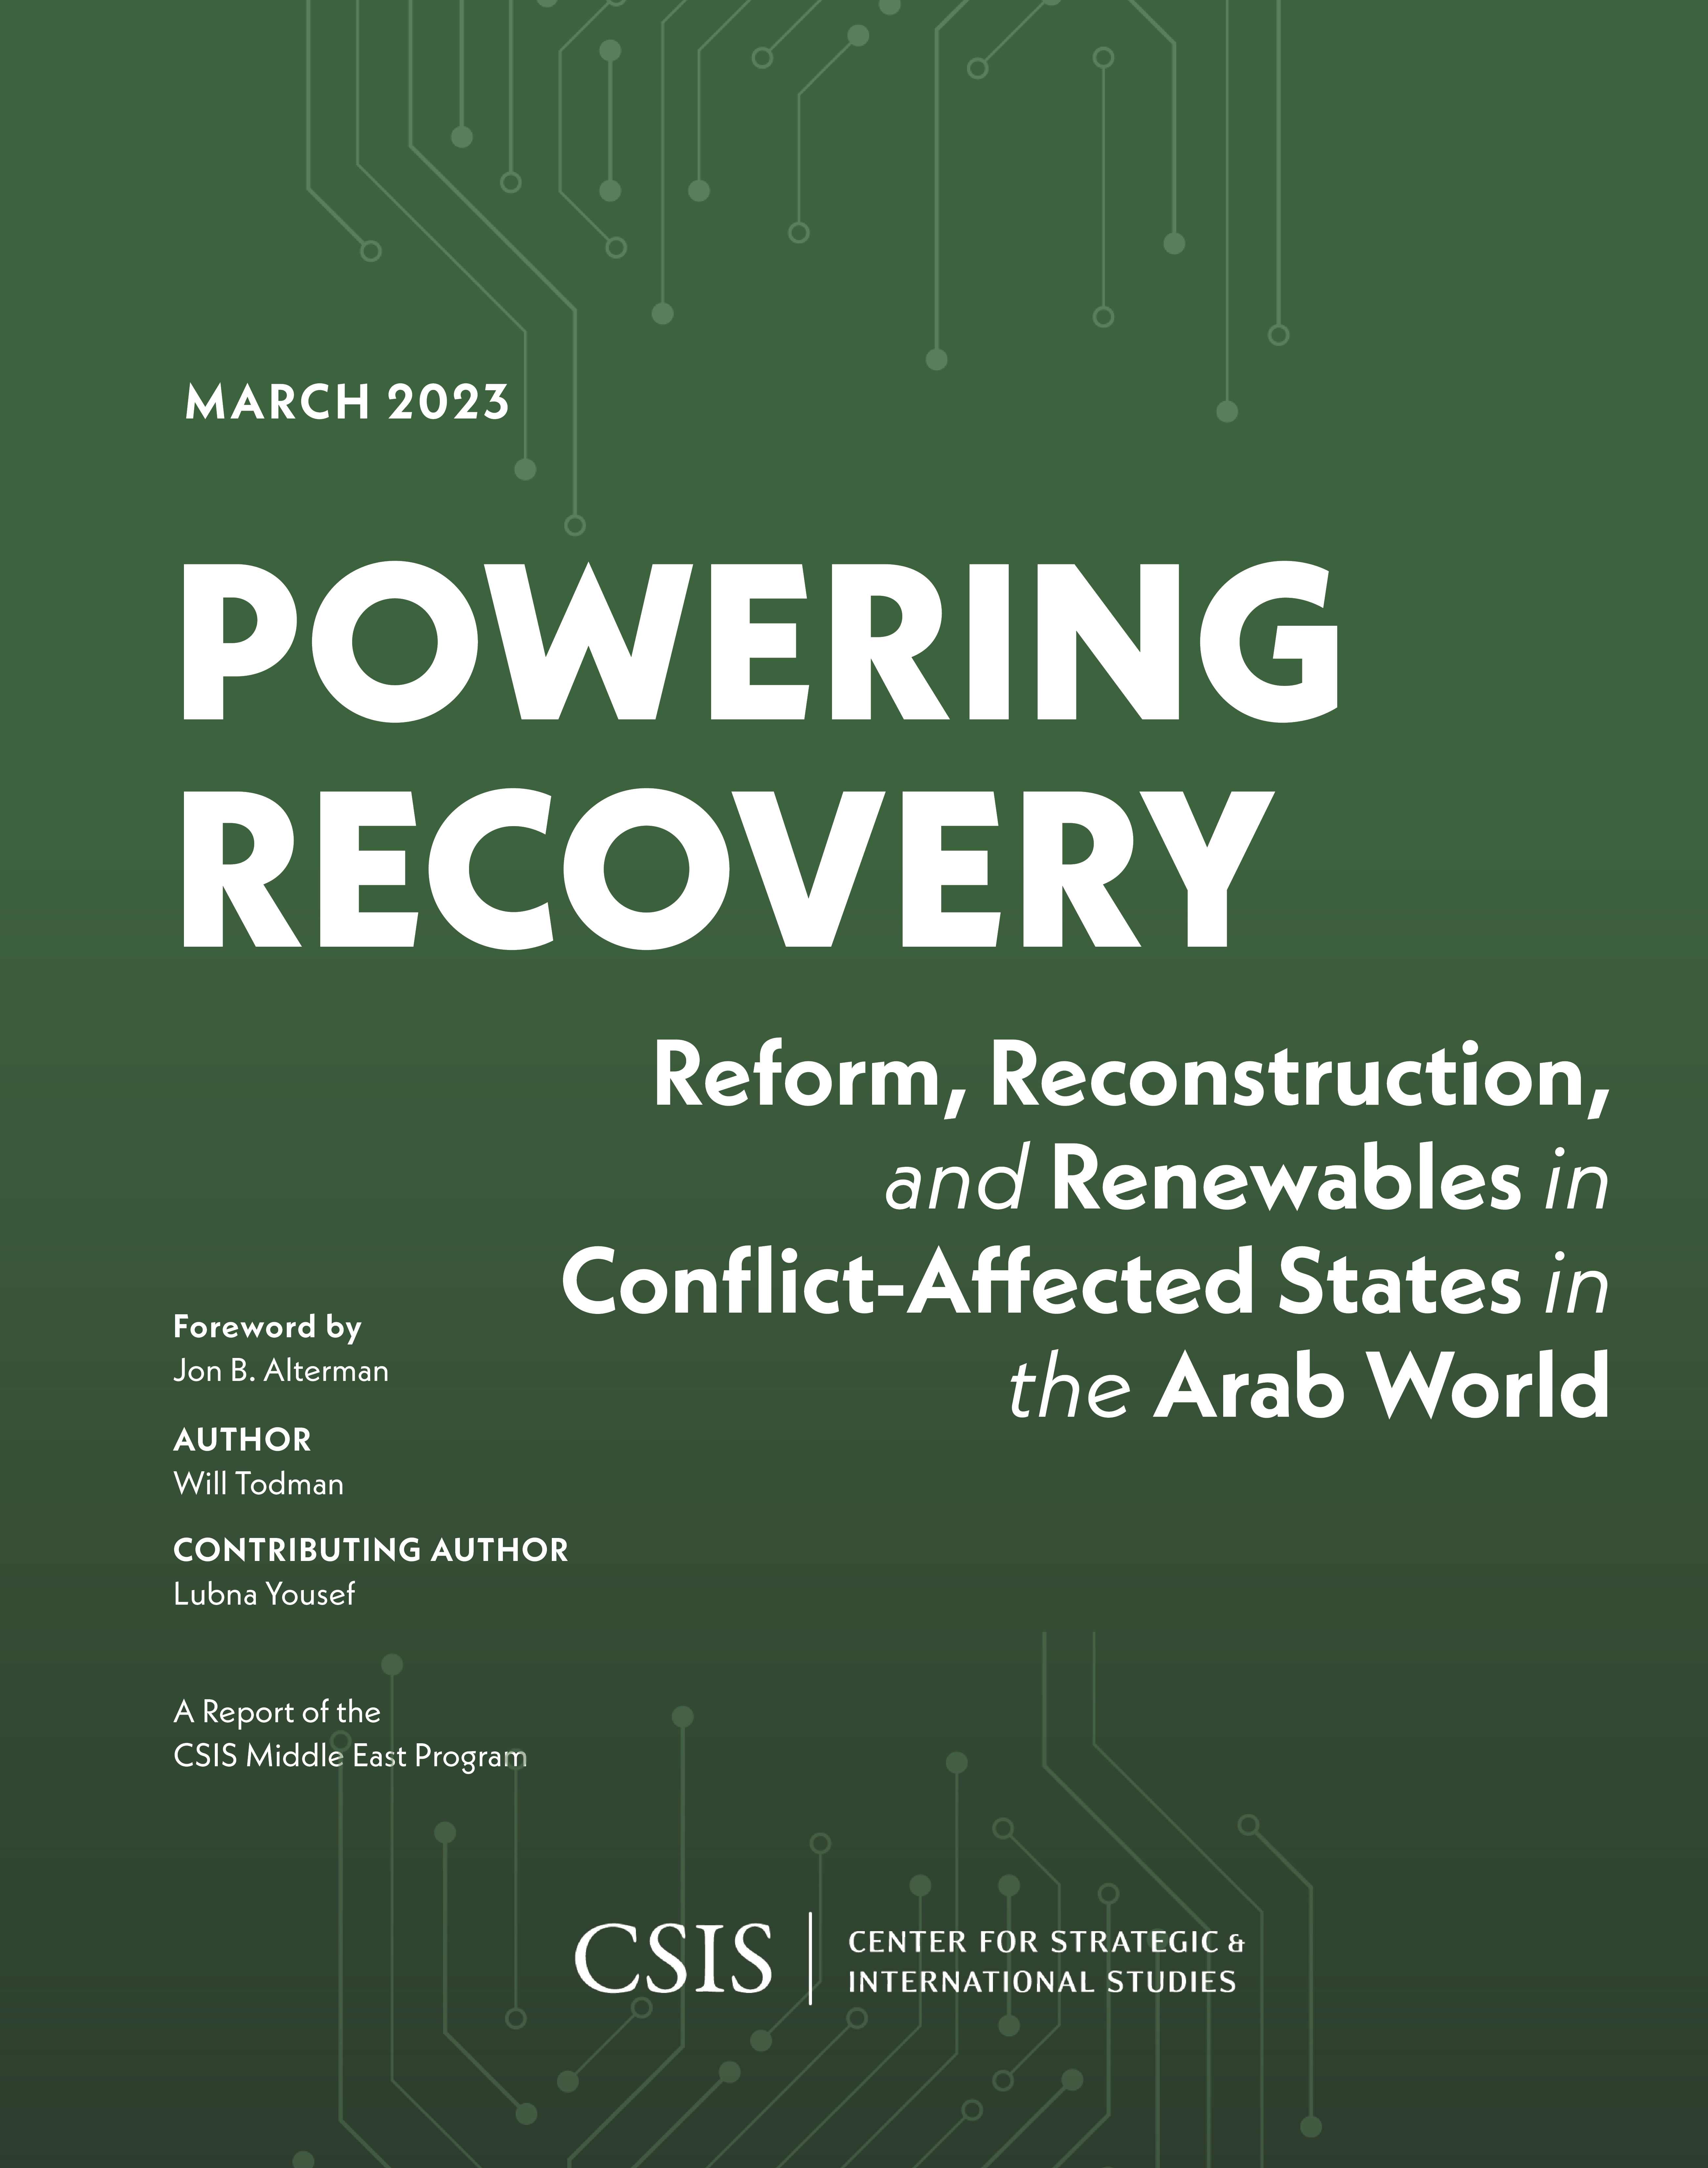 Powering Recovery: Reform, Reconstruction, and Renewables in Conflict-Affected States in the Arab World